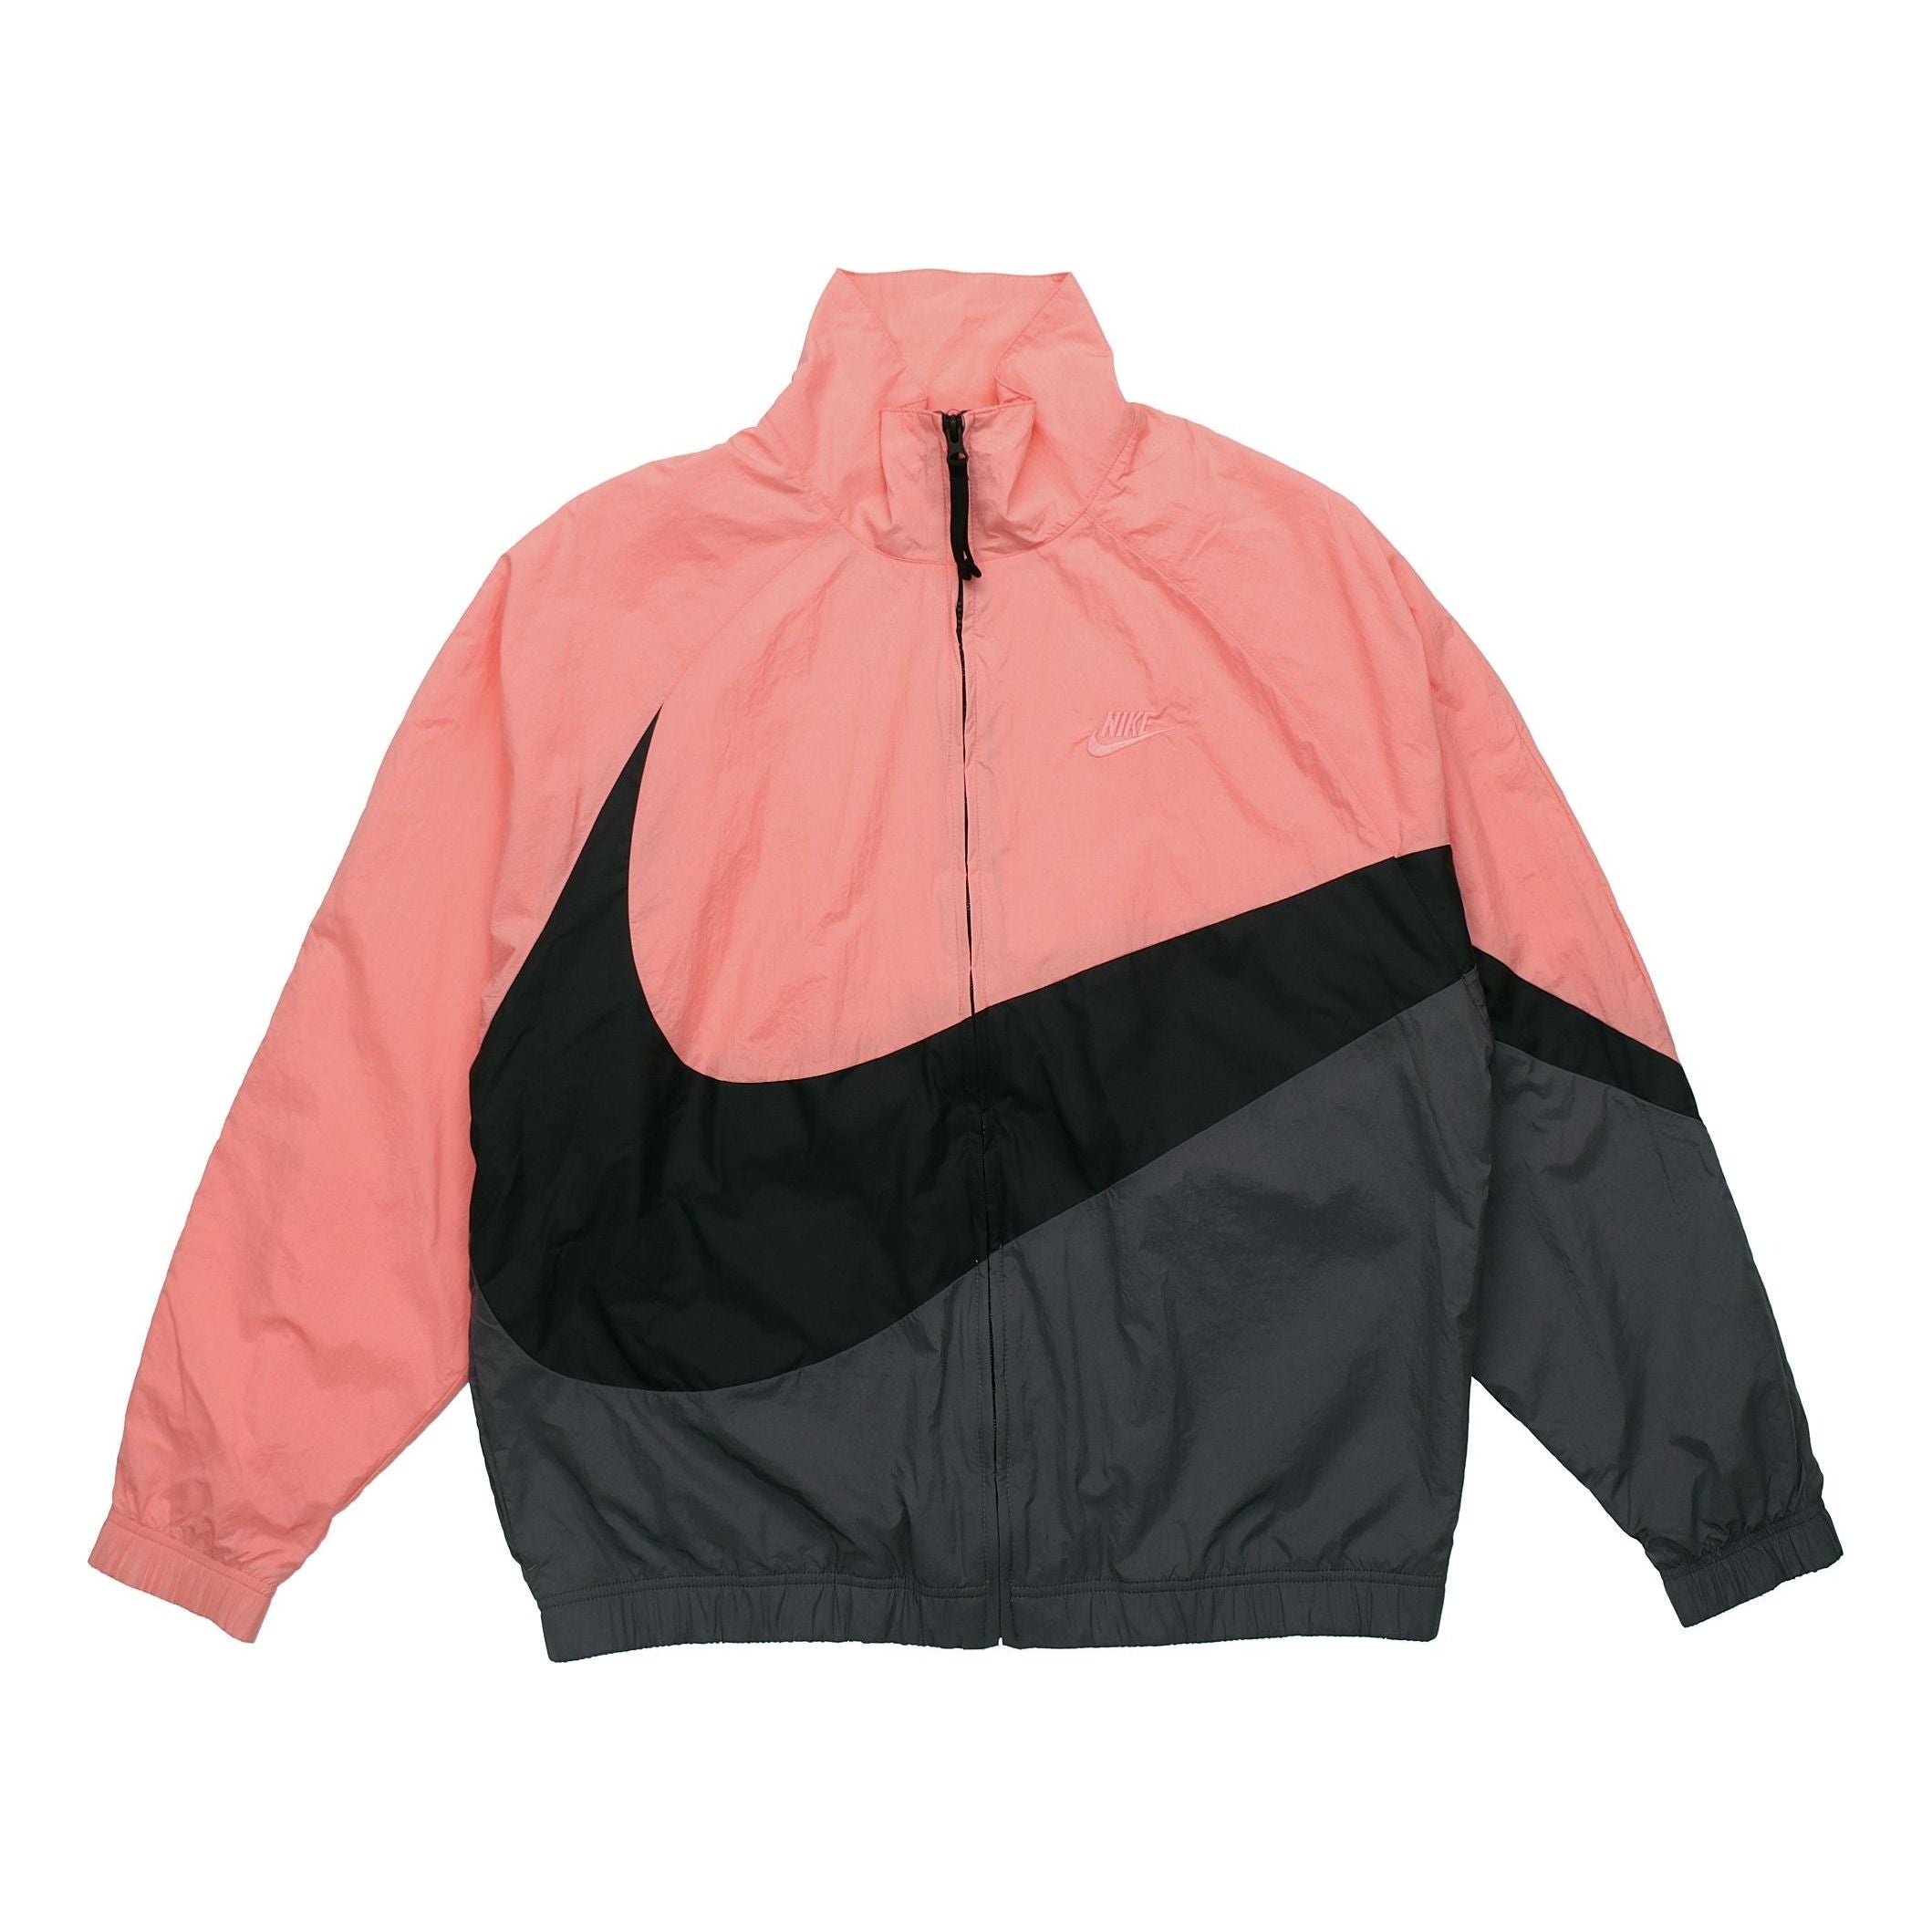 Nike Men's Sports Jacket Stand Collar Color Block 'Black Gray Pink' AR3133-668 - 1